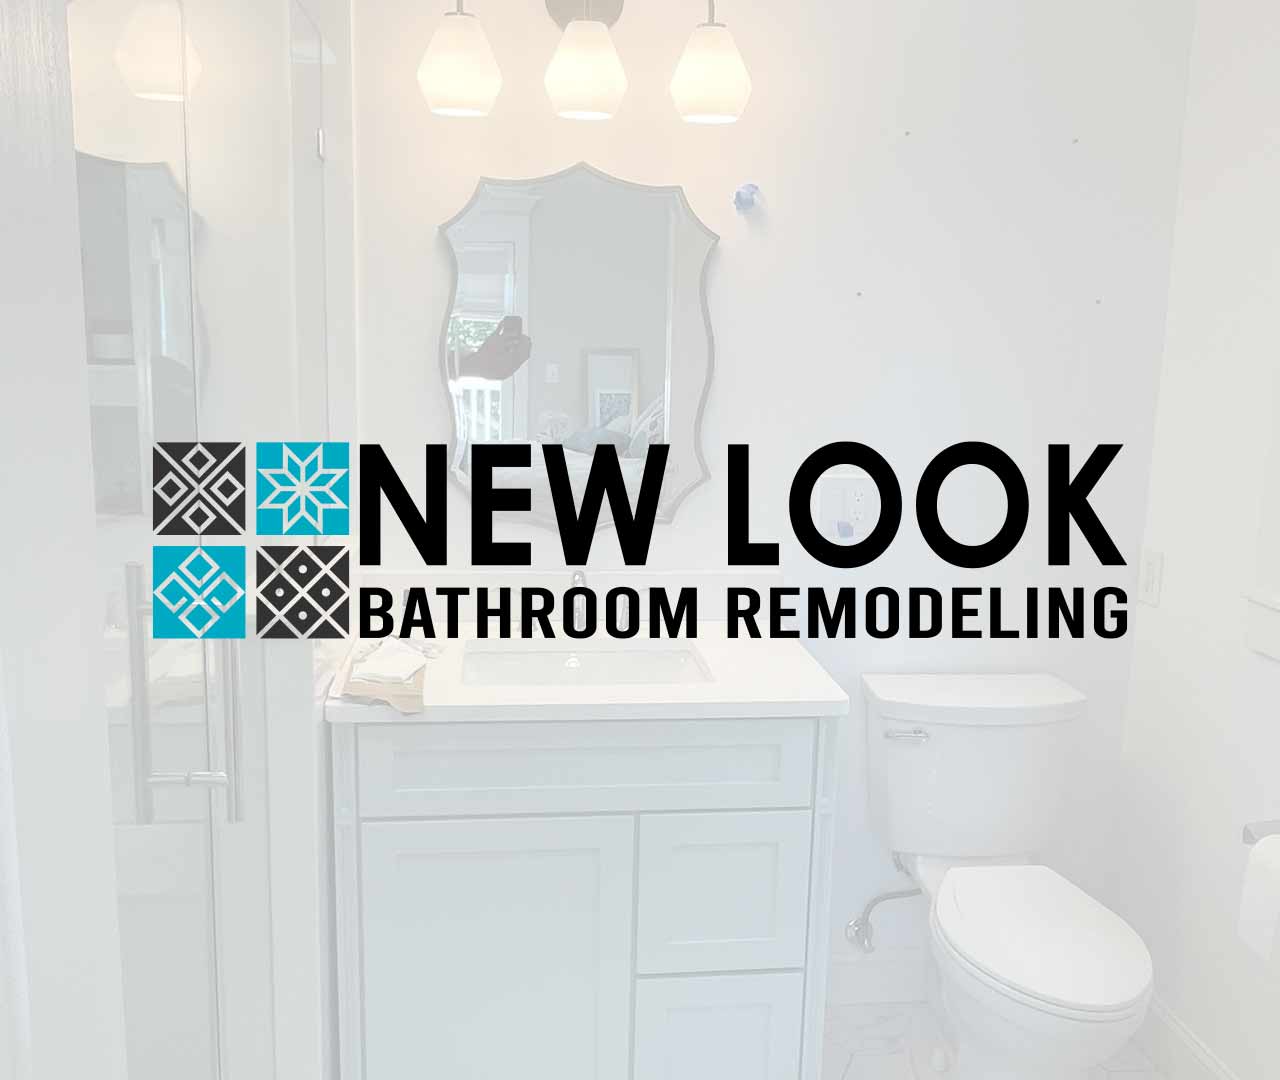 Services of Bathroom remodeling